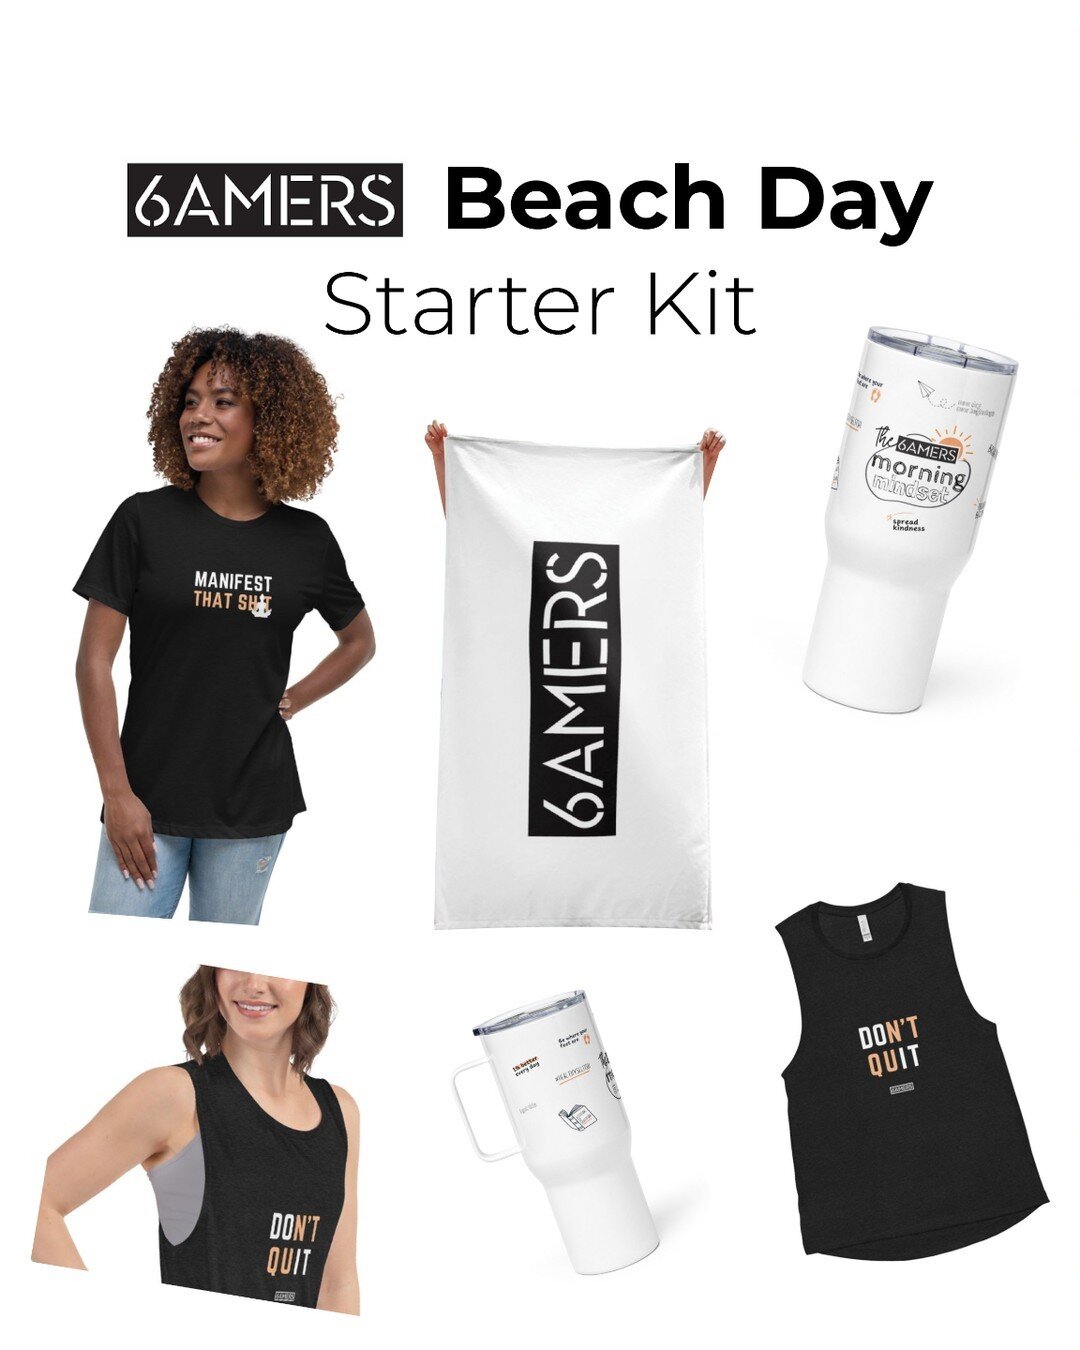 ☀️🌴 Headed to the beach this summer?  We have some fun new summer swag designs for you to sport your morning mindset to no matter where your summer days take you.

Which new 6AMERS merch is your favorite?🌅✨

(Link in bio)
 

.
.
.

 
#ProgressOverP